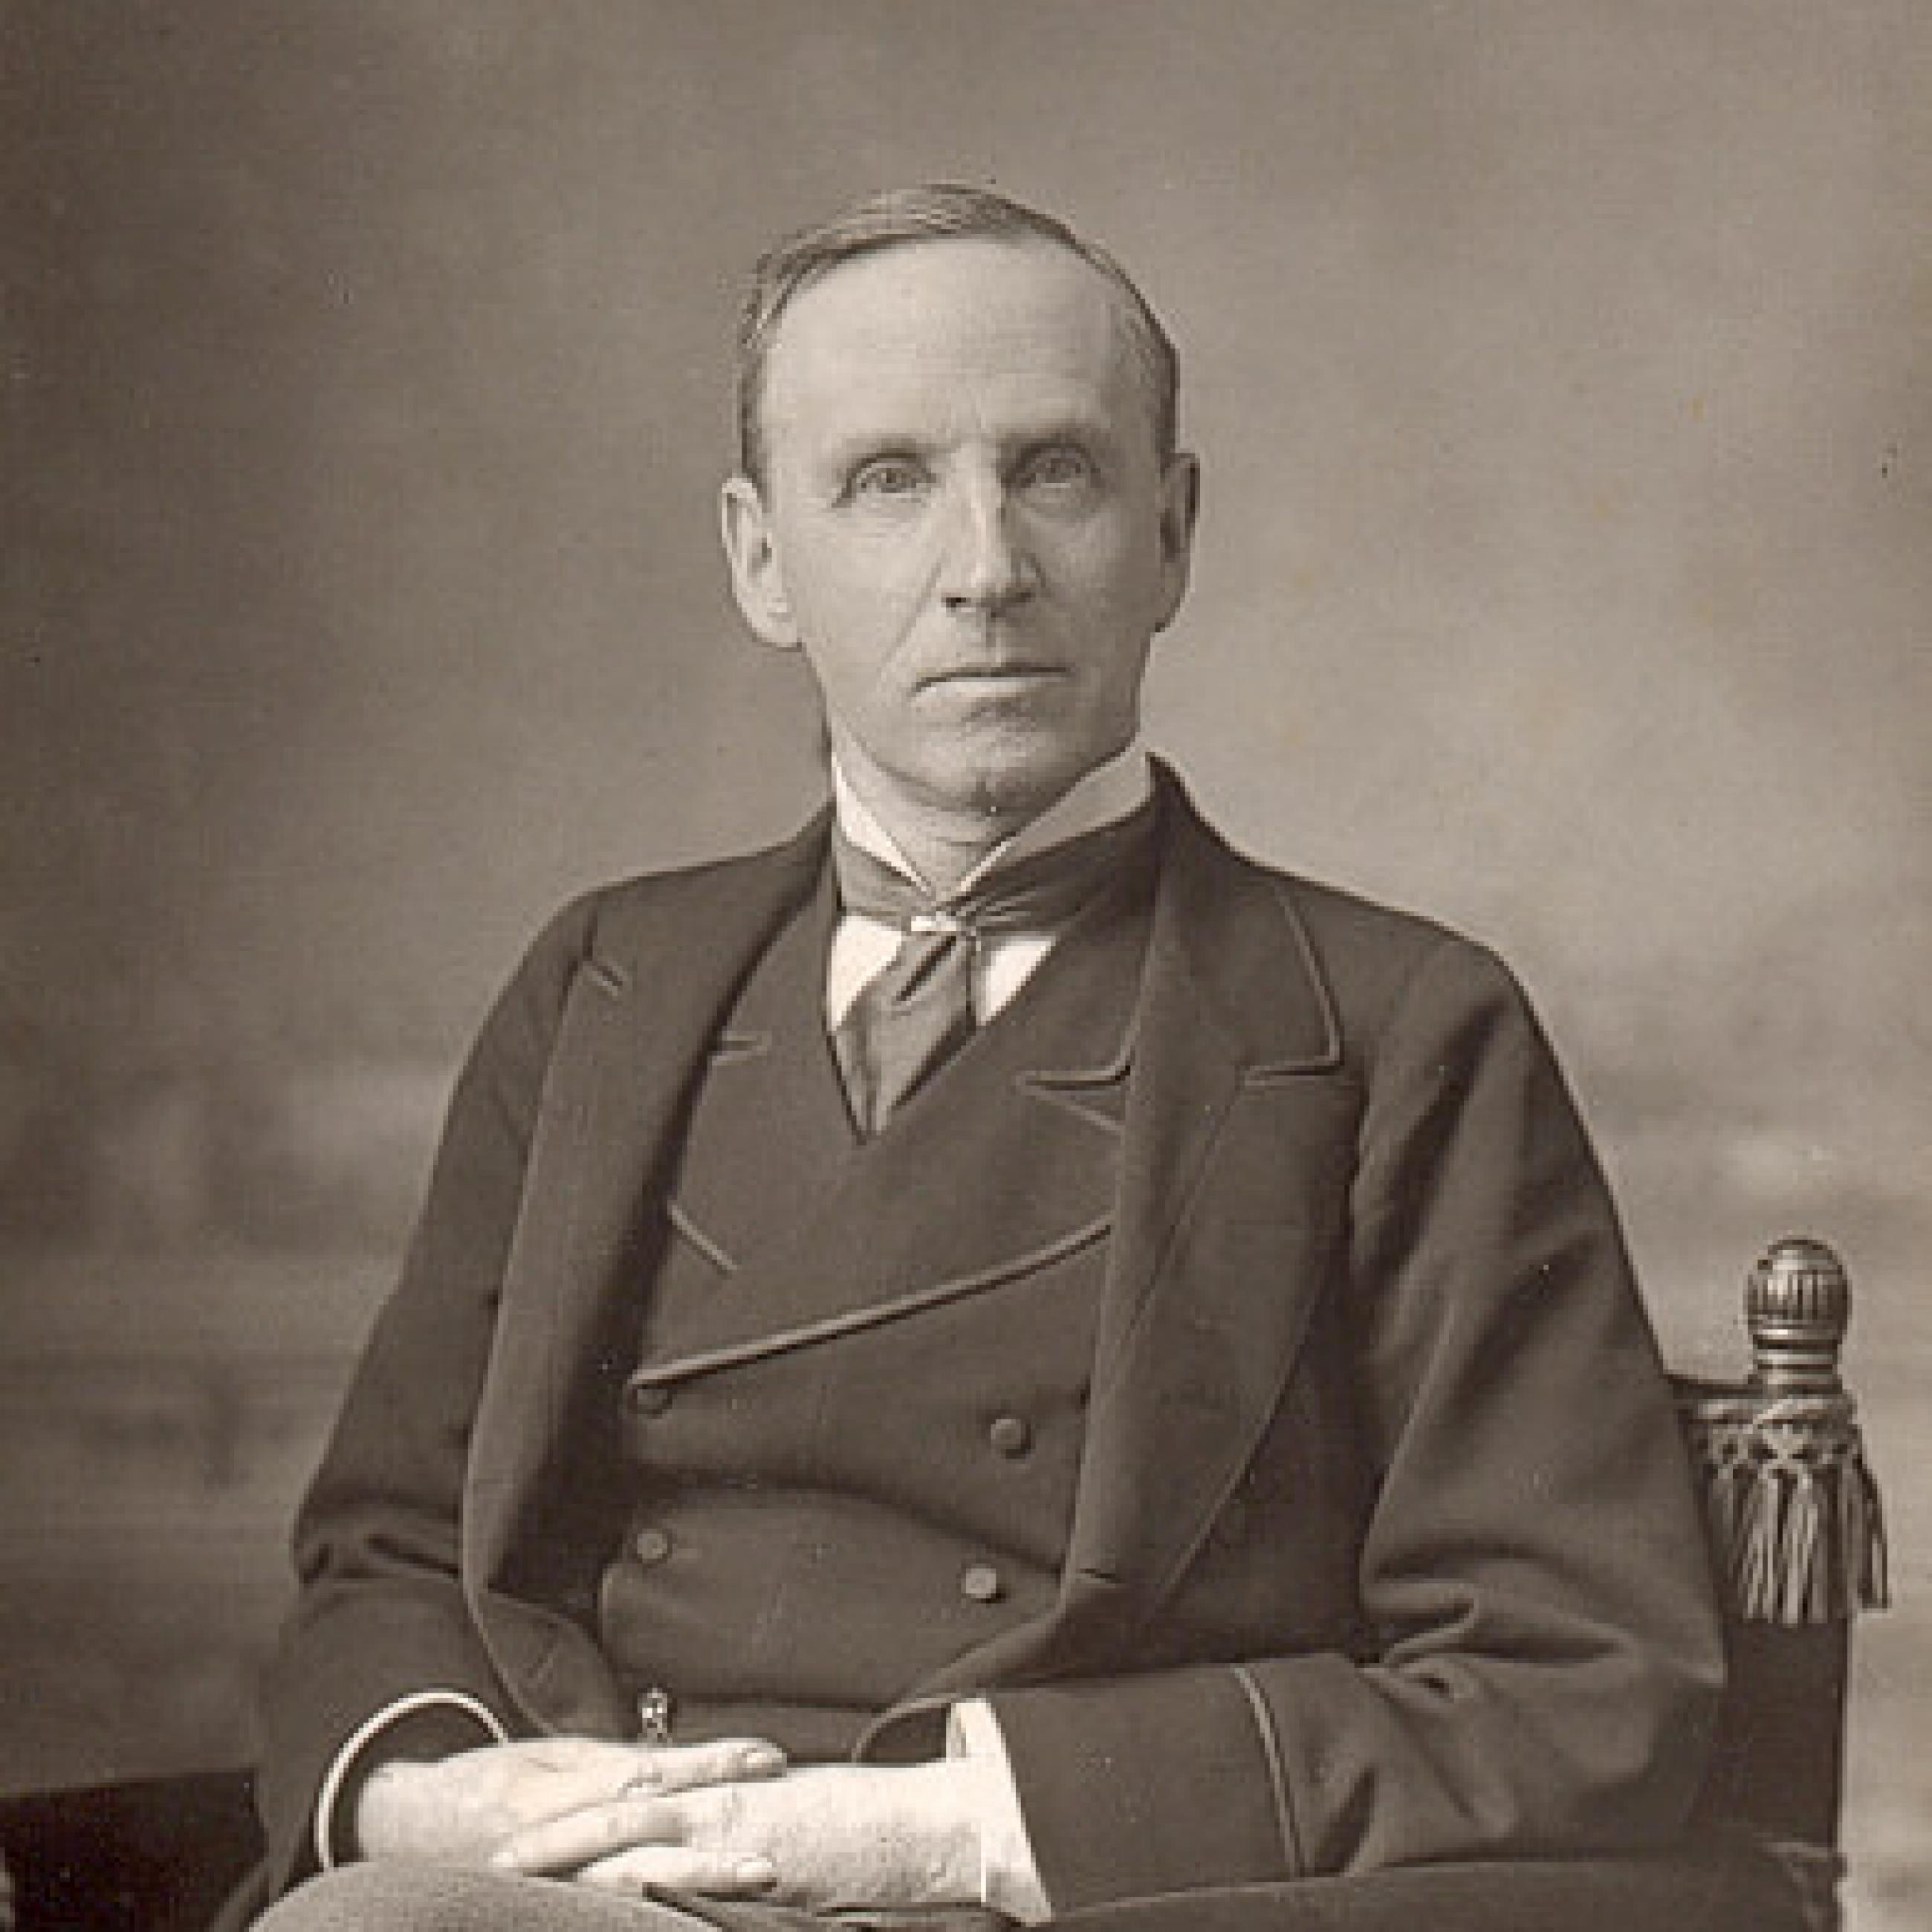 a black and white photo depicts John Morley, a fair-skinned englishman with short blond hair and light eyes